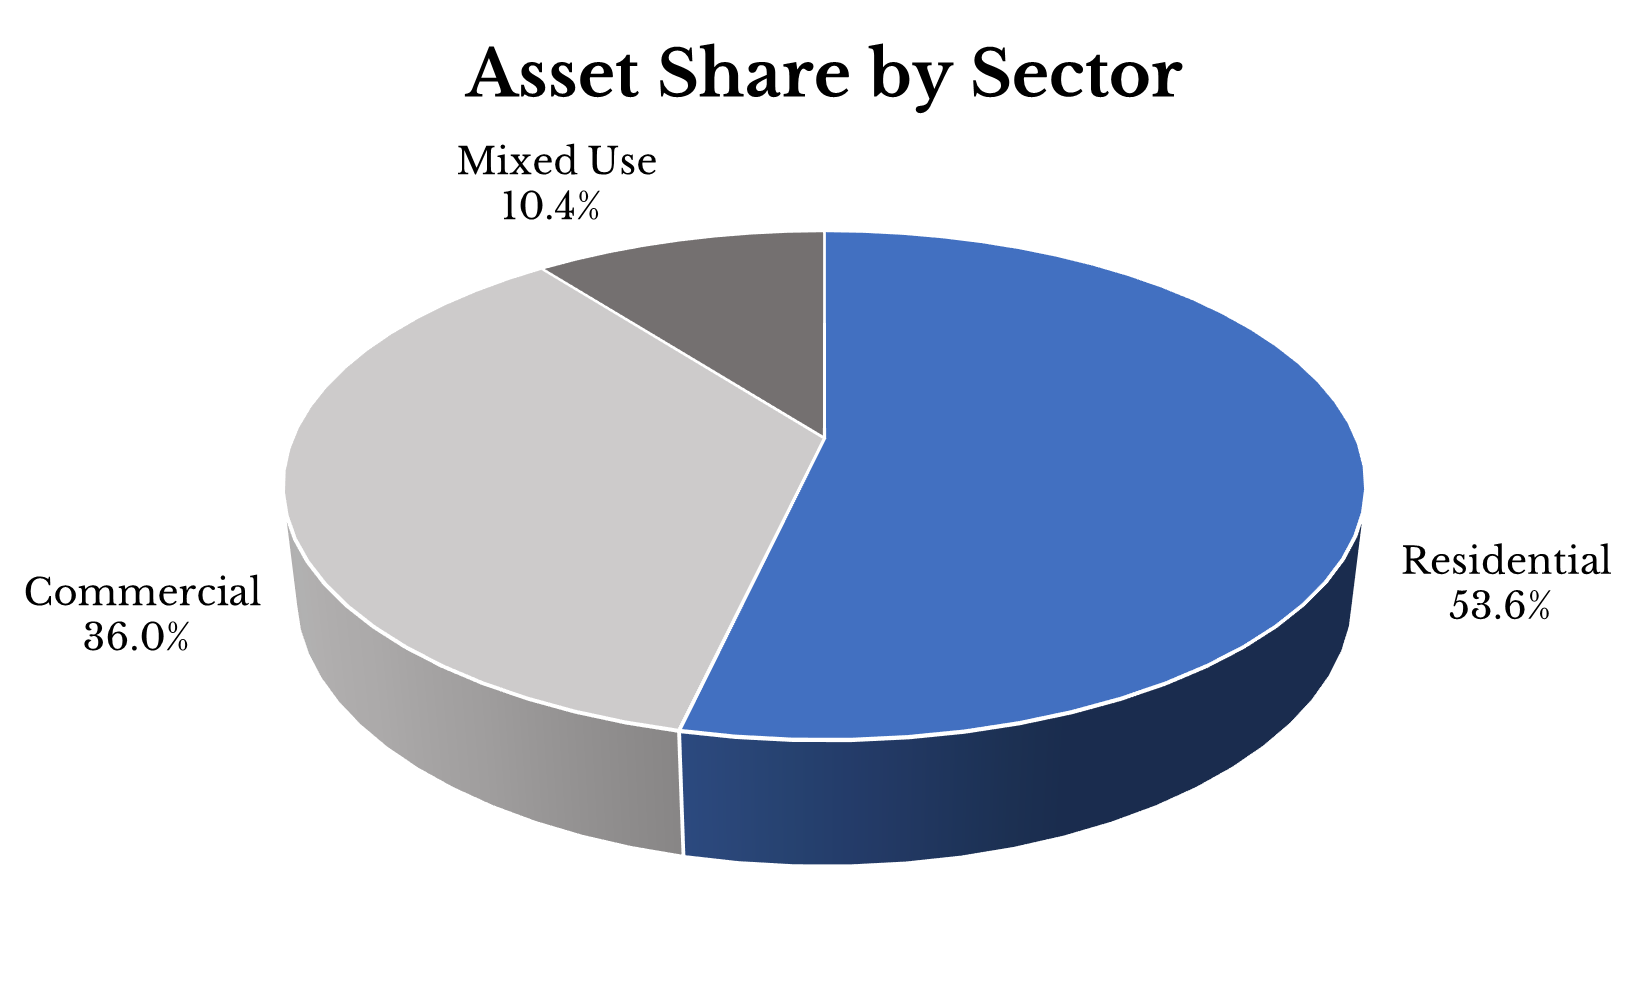 Capital Prudential Asset Share by Sector